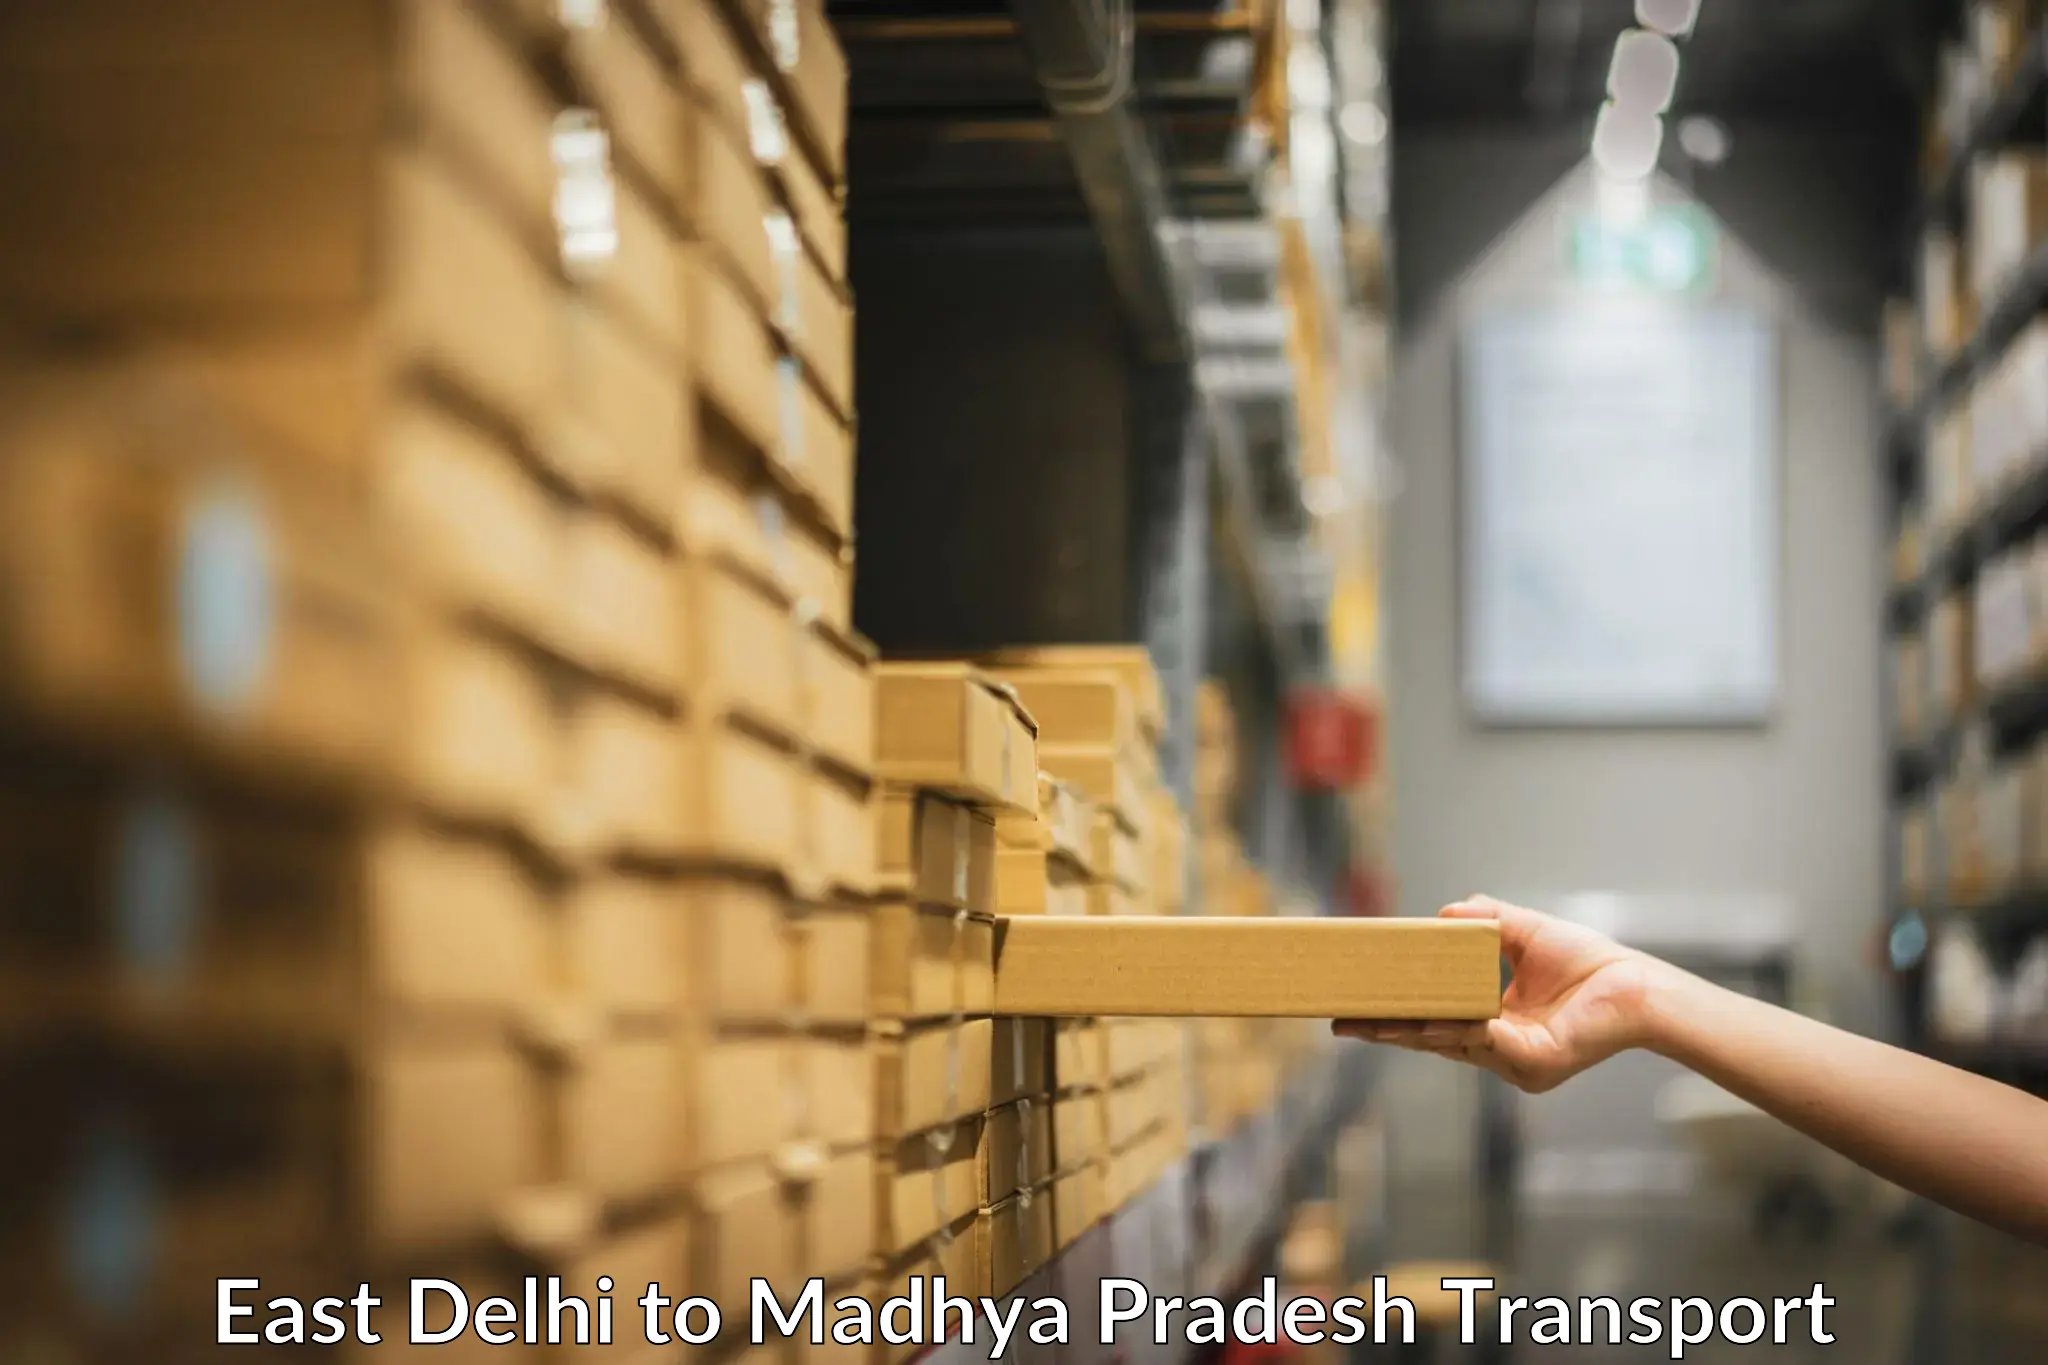 Truck transport companies in India in East Delhi to Malanjkhand